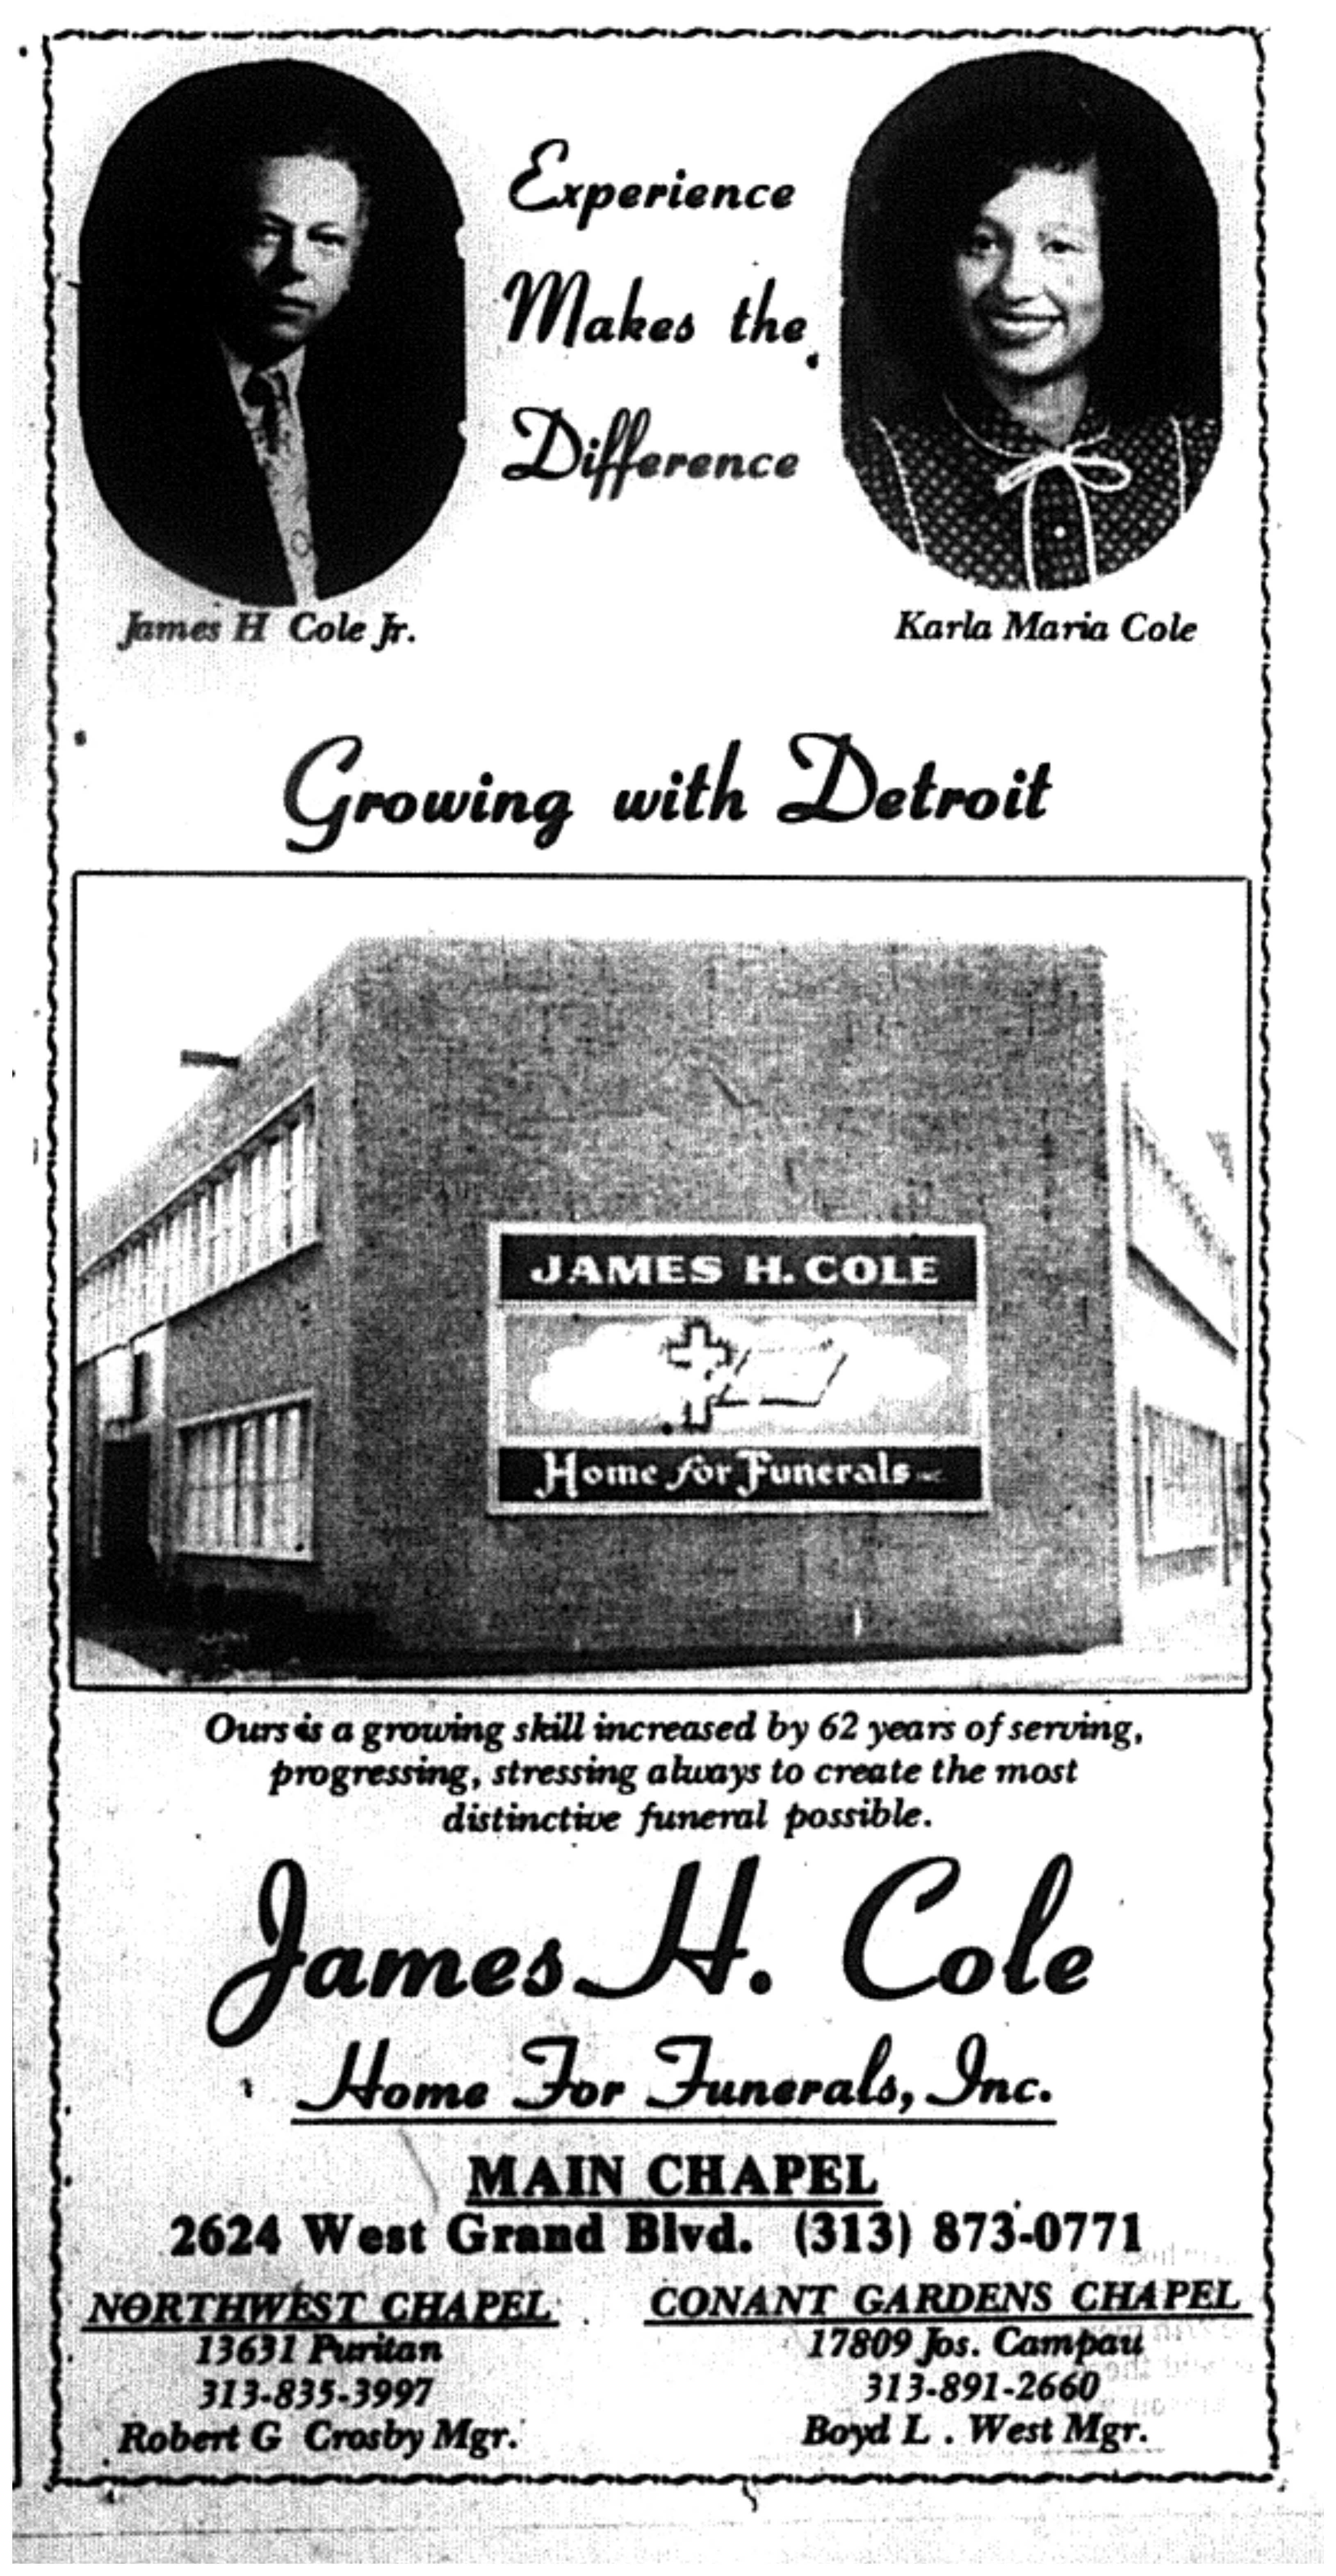 James H. Cole & Charles T. Cole | The Business of Black Death in Detroit3258 x 6282